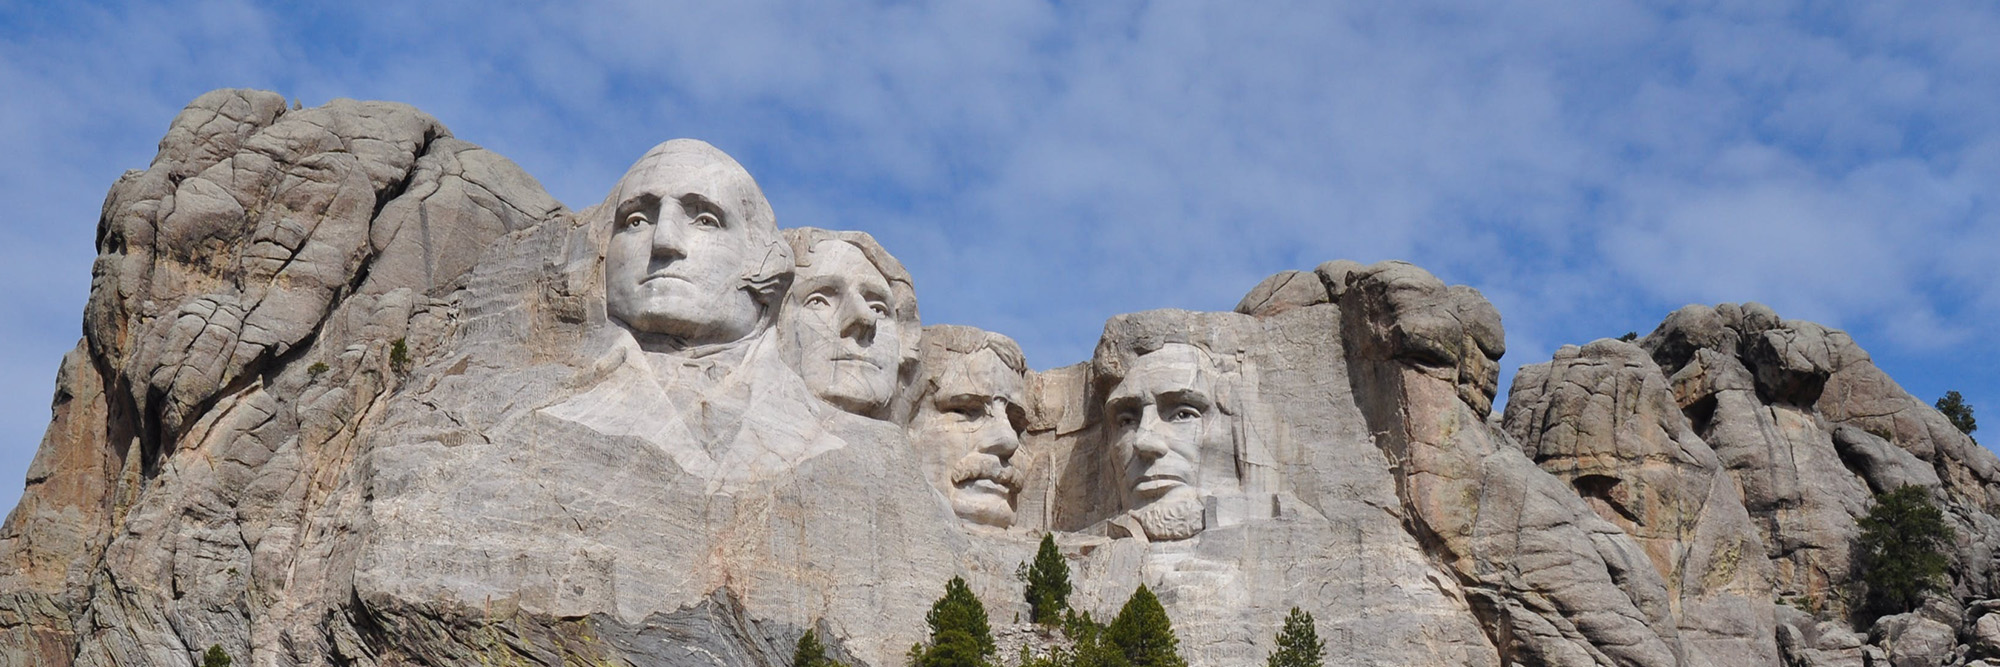 Mount Rushmore Memorial in the United States